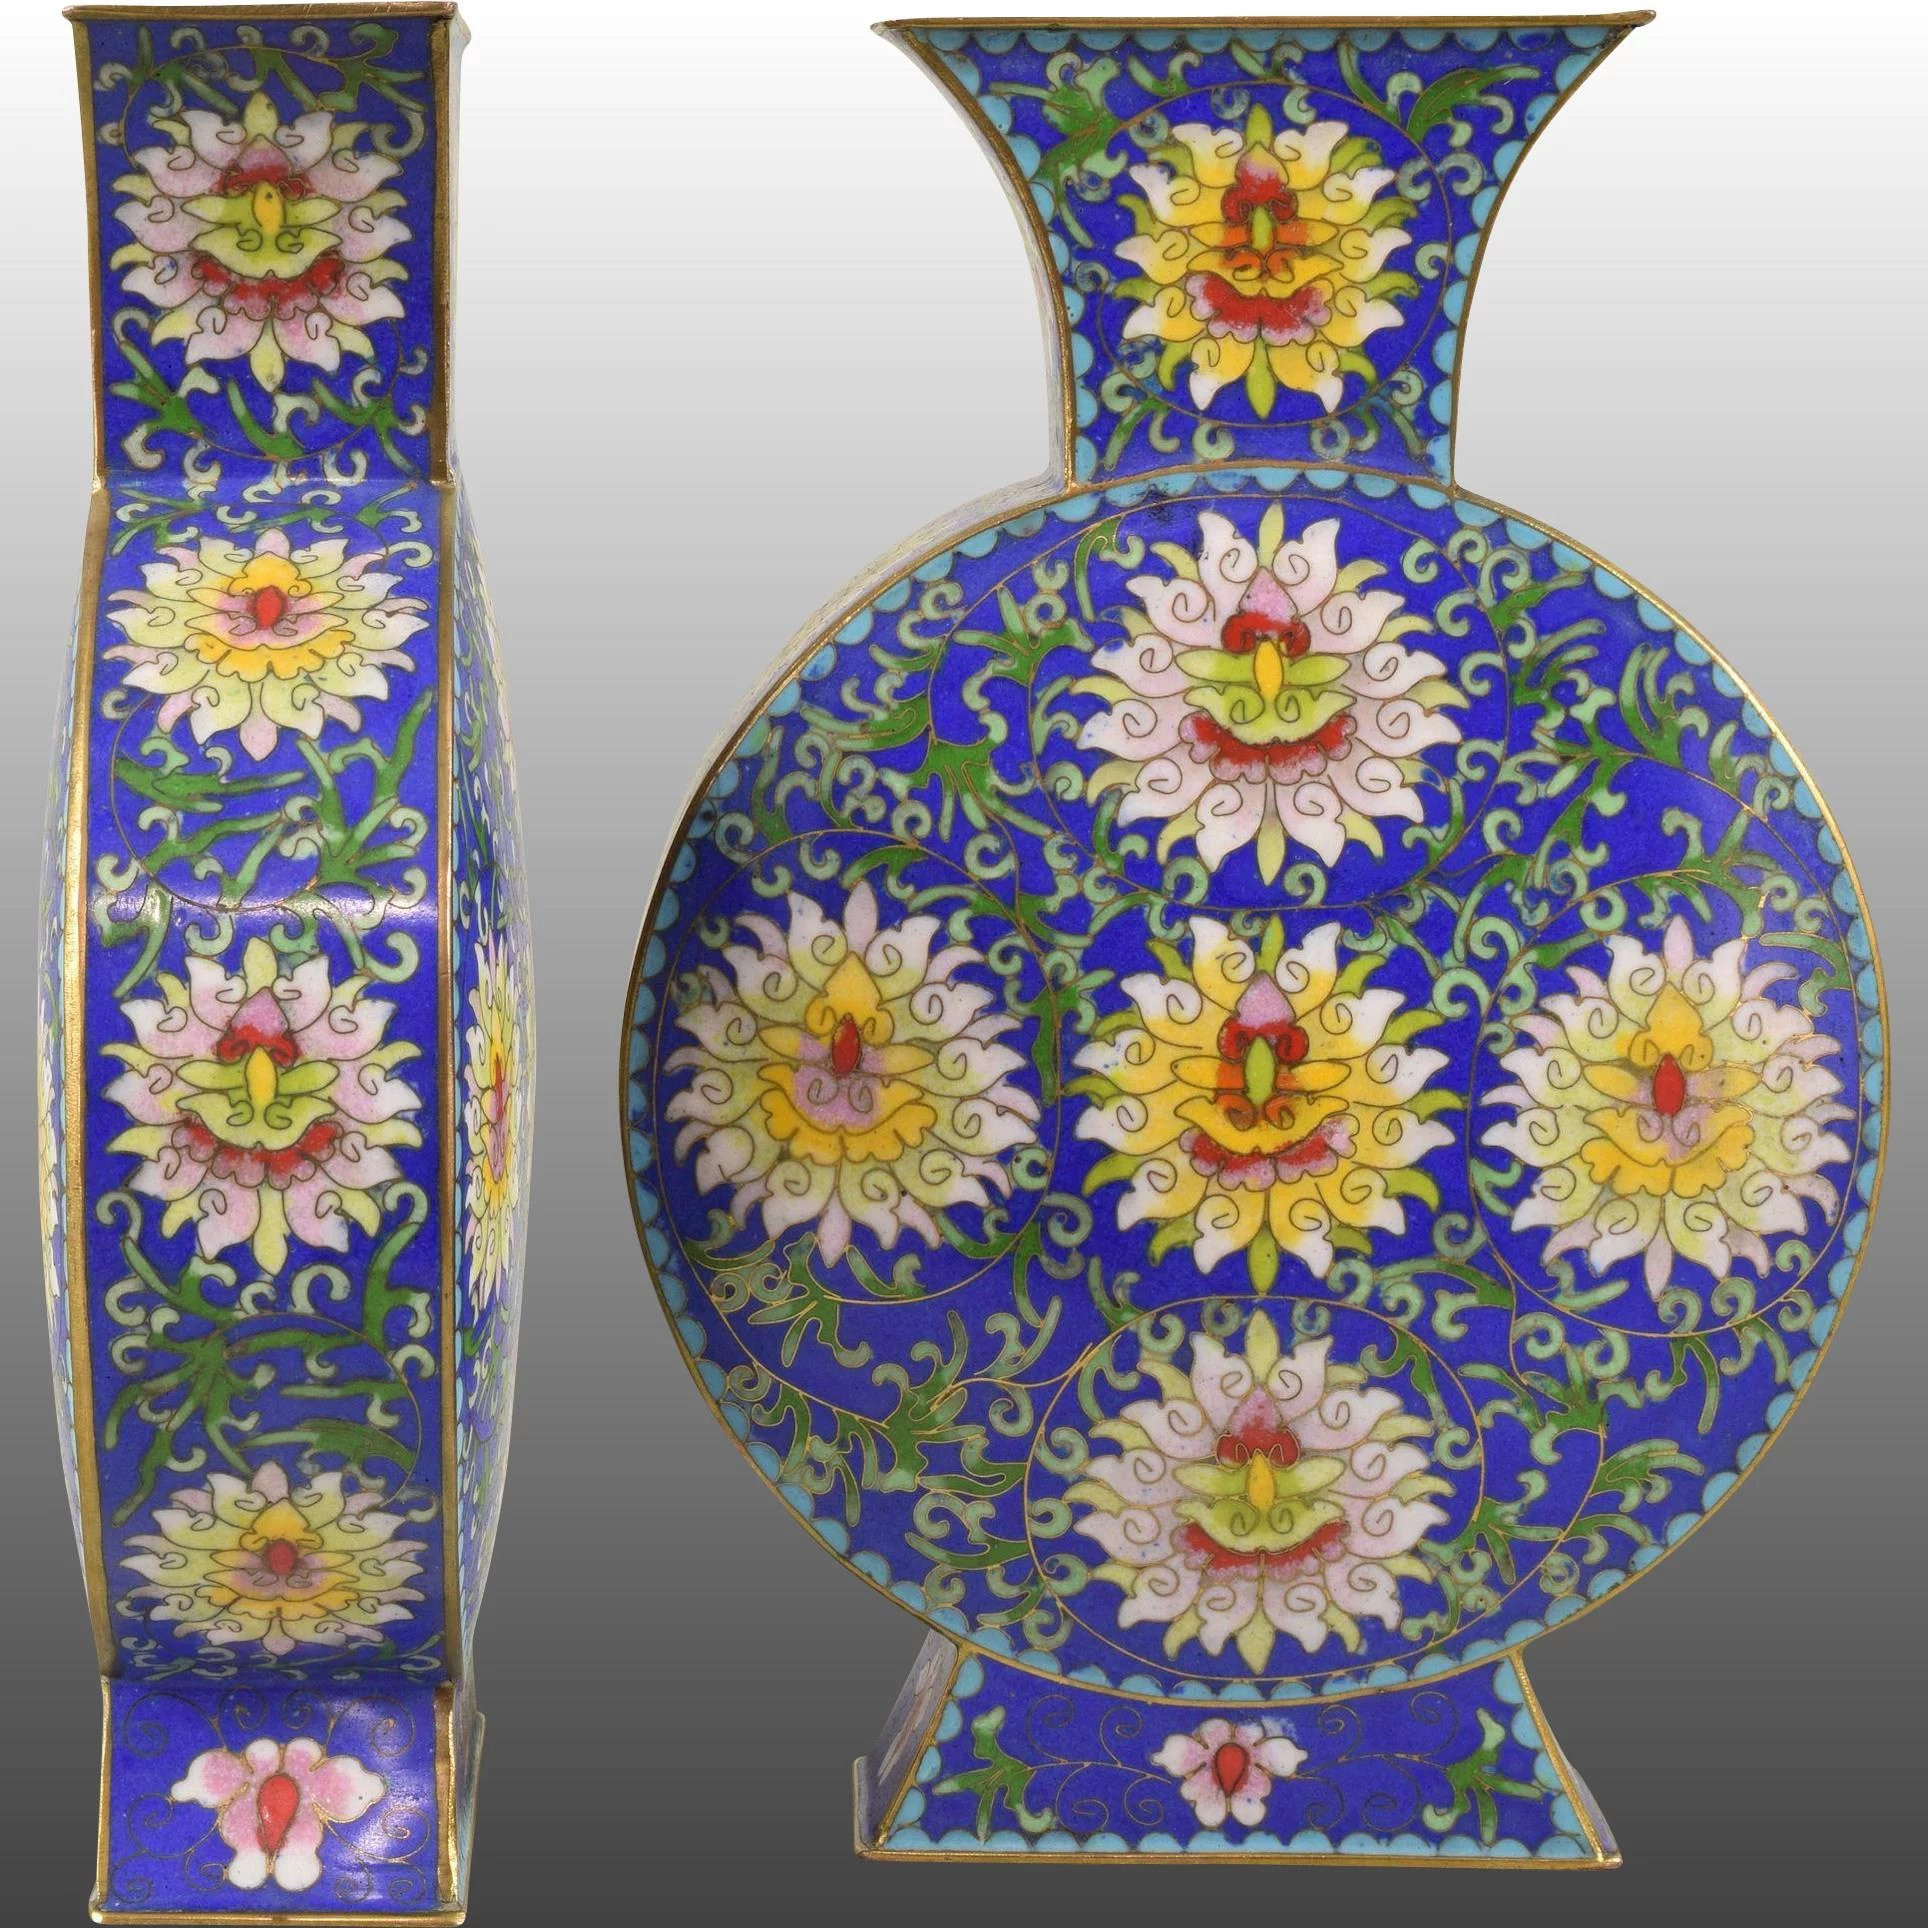 28 Great Pair Of Chinese Cloisonne Vases 2024 free download pair of chinese cloisonne vases of pair vintage petite blue cloisonne pillow type vases with yellow with regard to click to expand